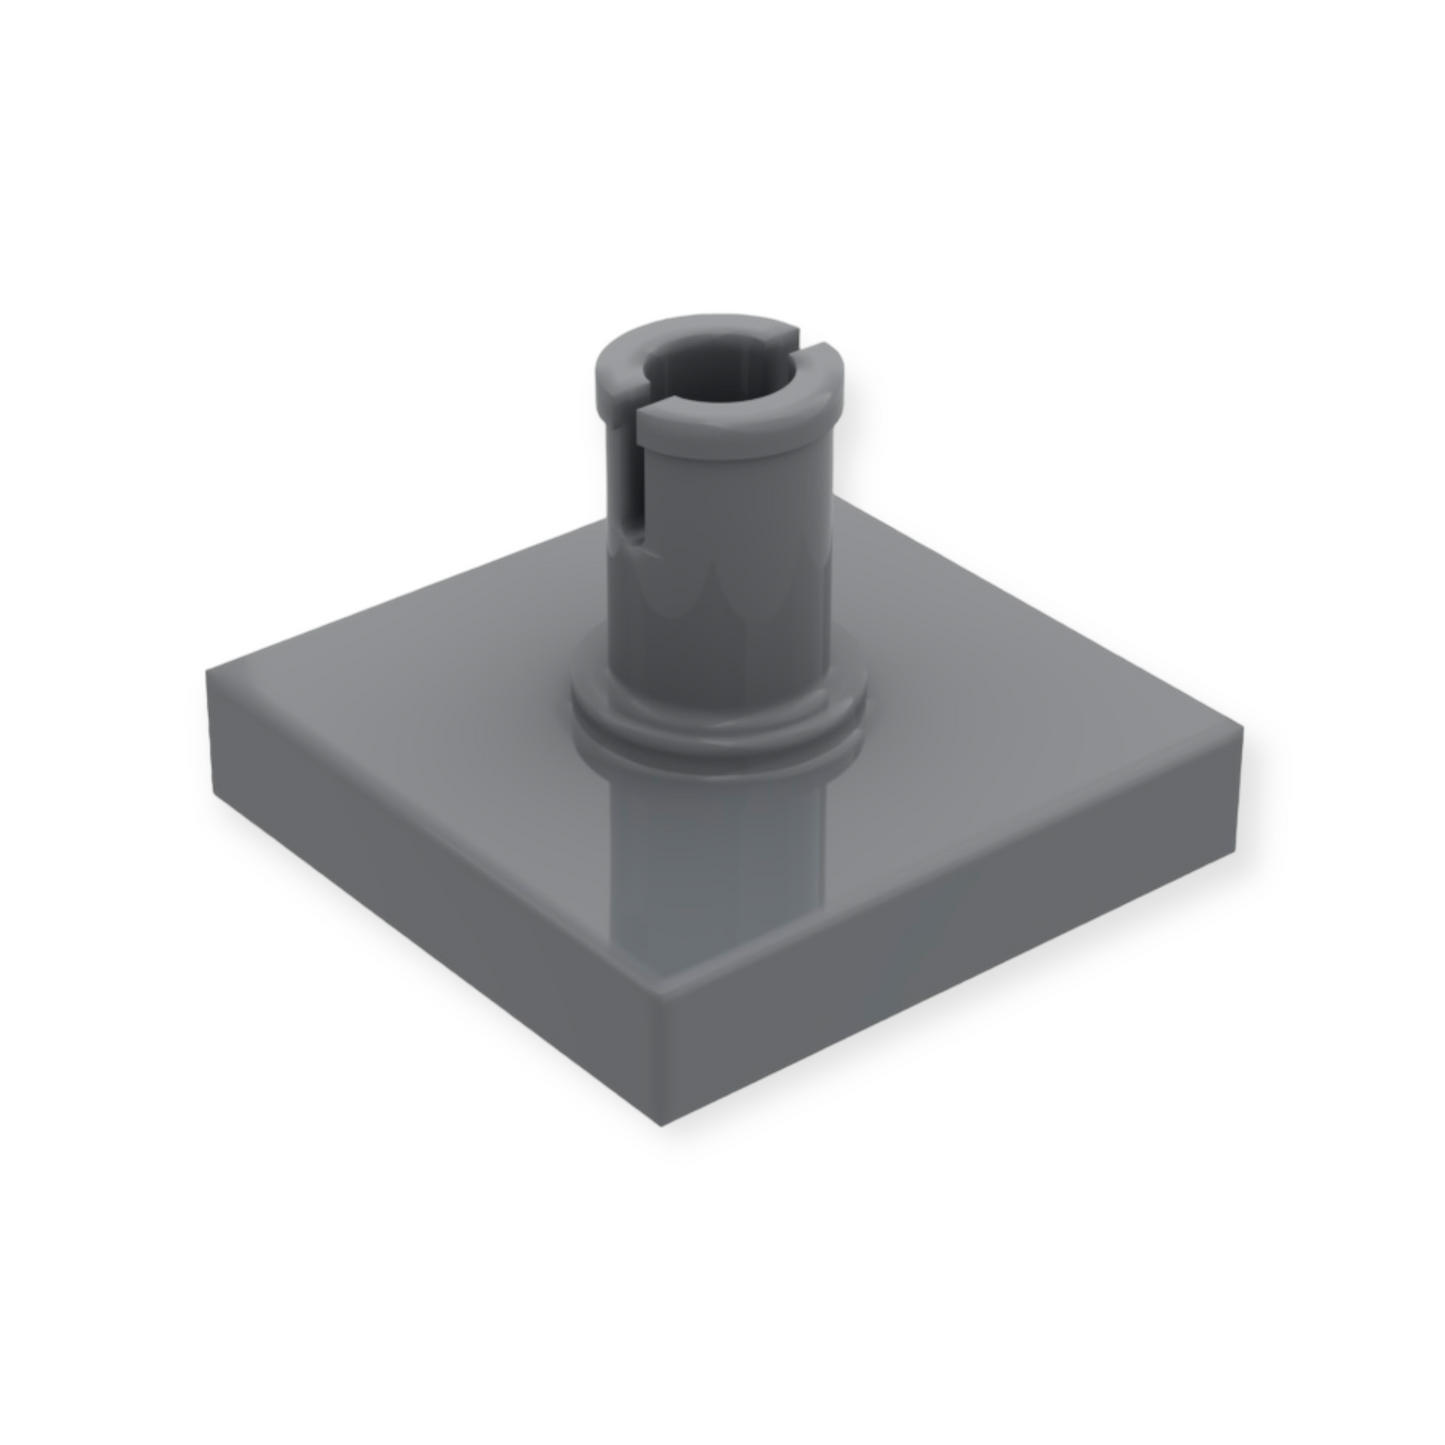 LEGO Tile Modified 1x2 with Pin - in Dark Bluish Gray